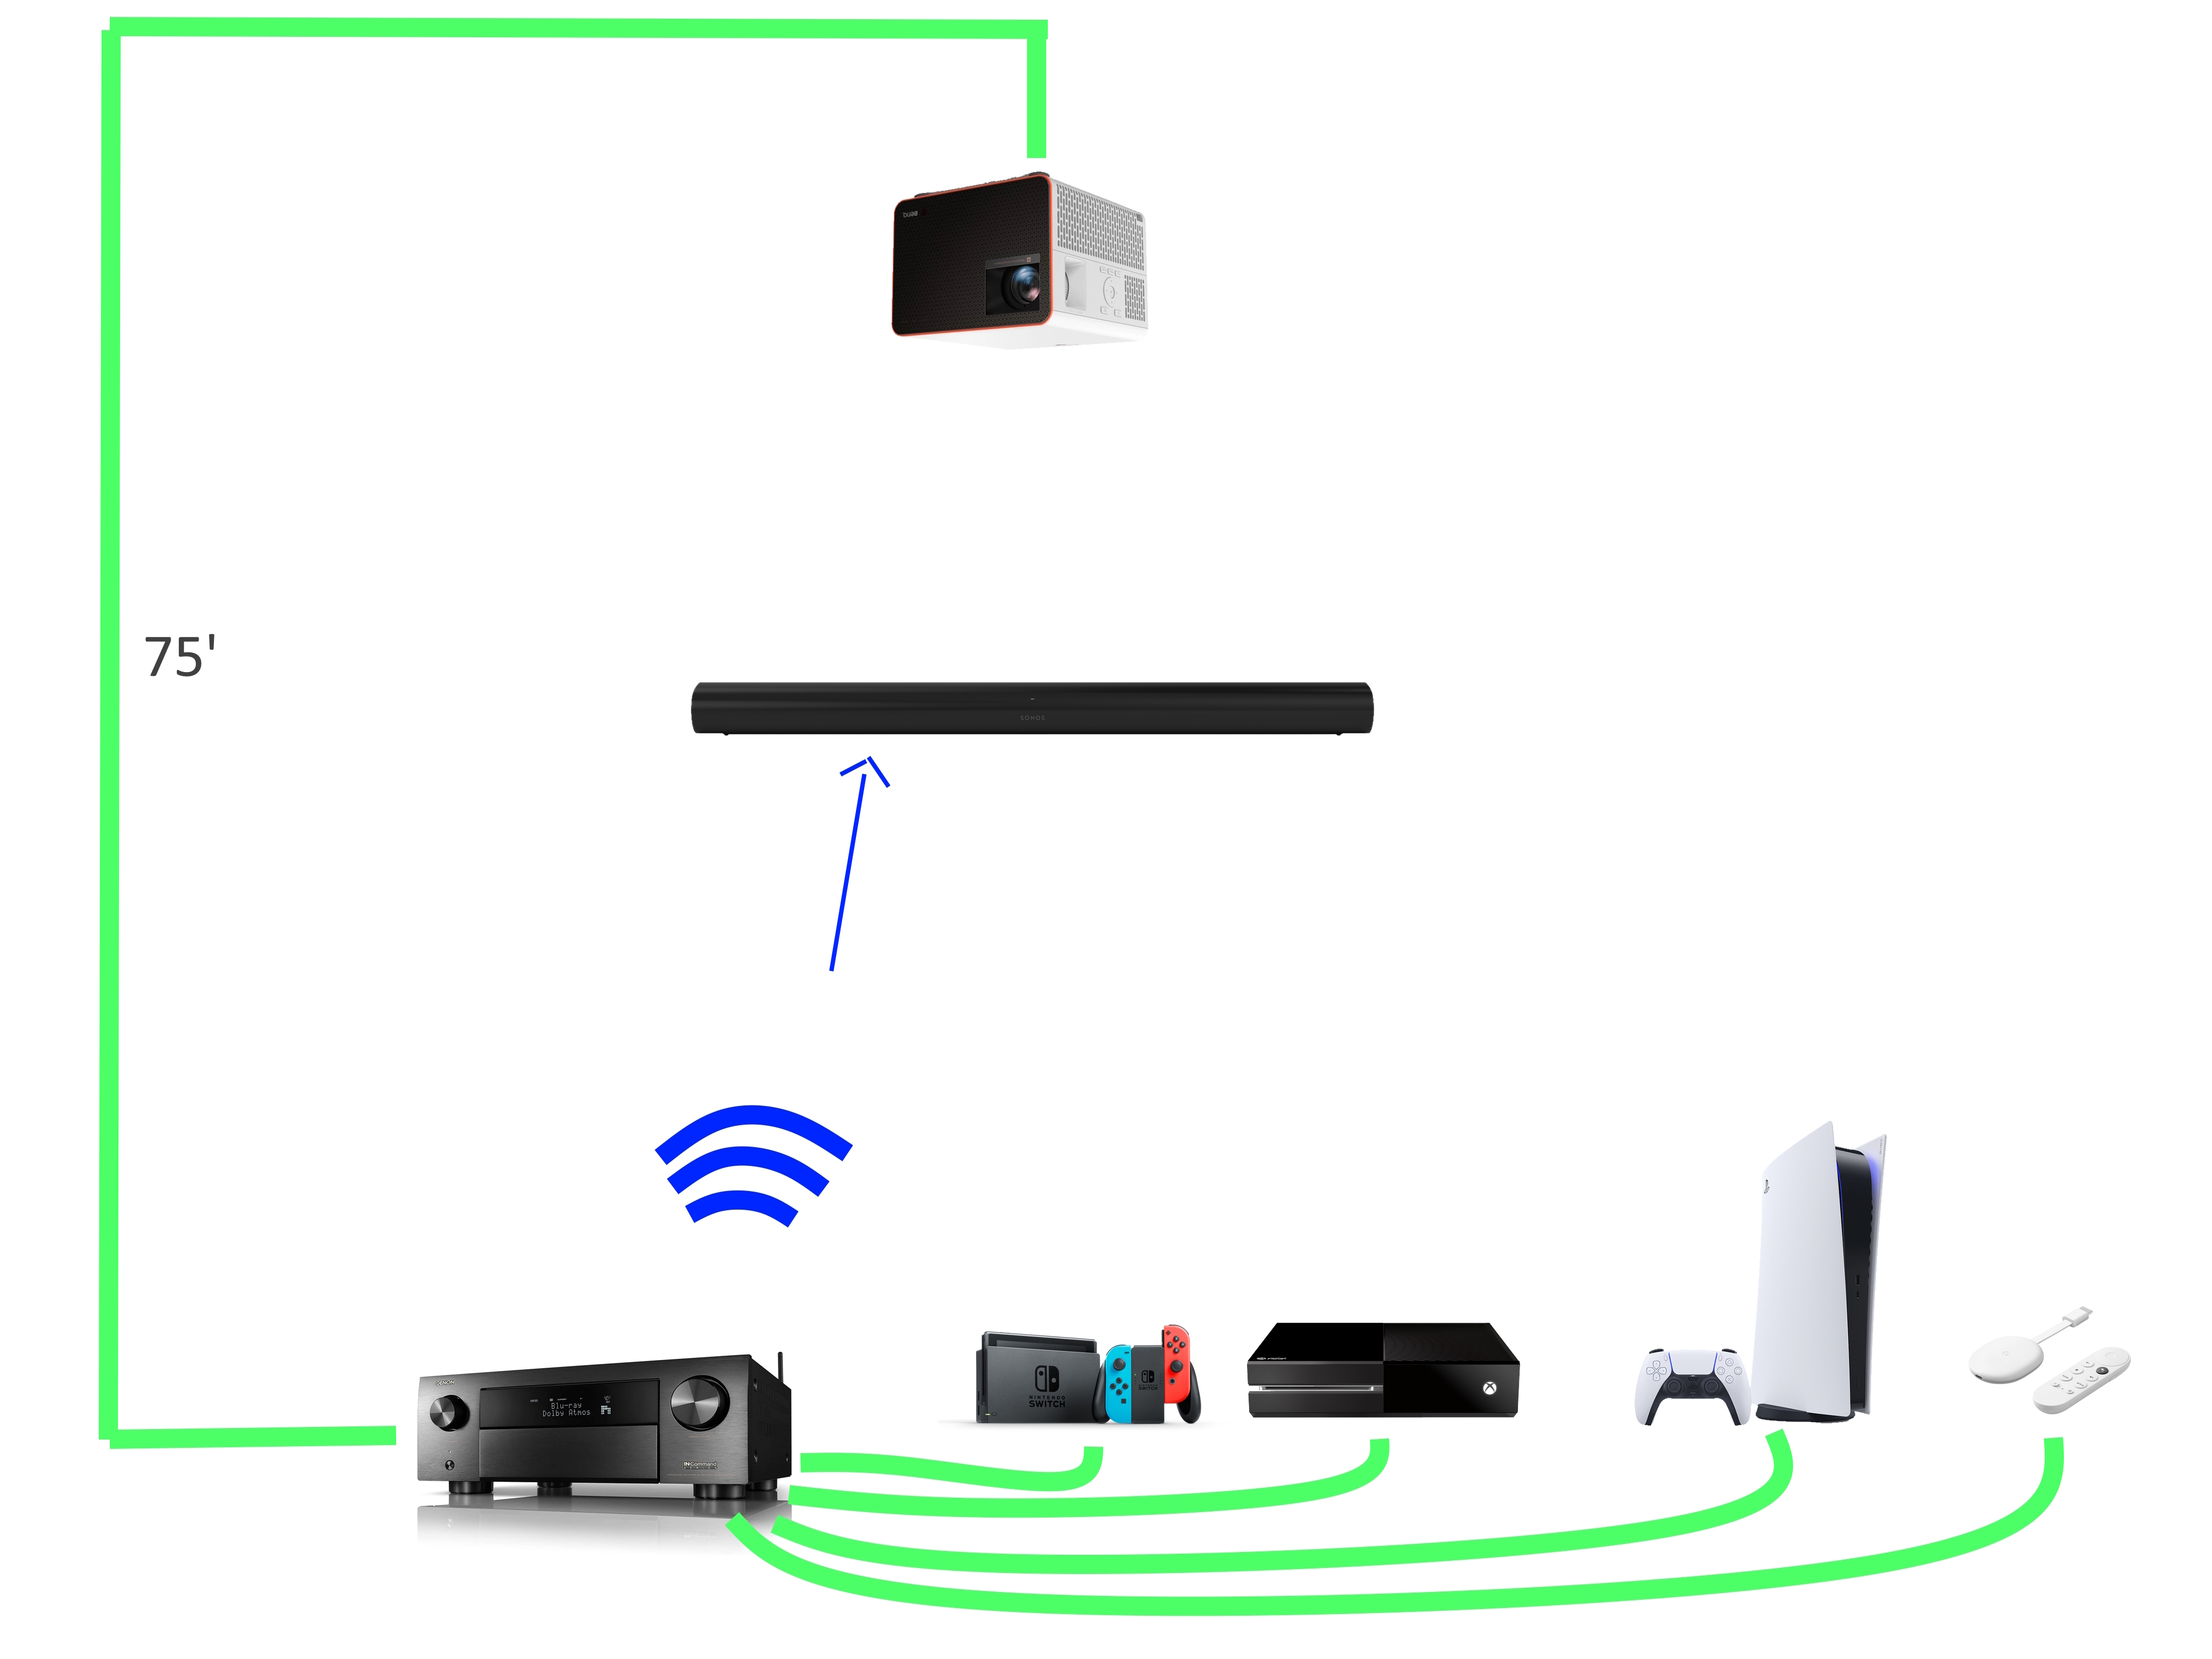 HDMI ARC for Soundbars — How It Works • Home Theater Forum